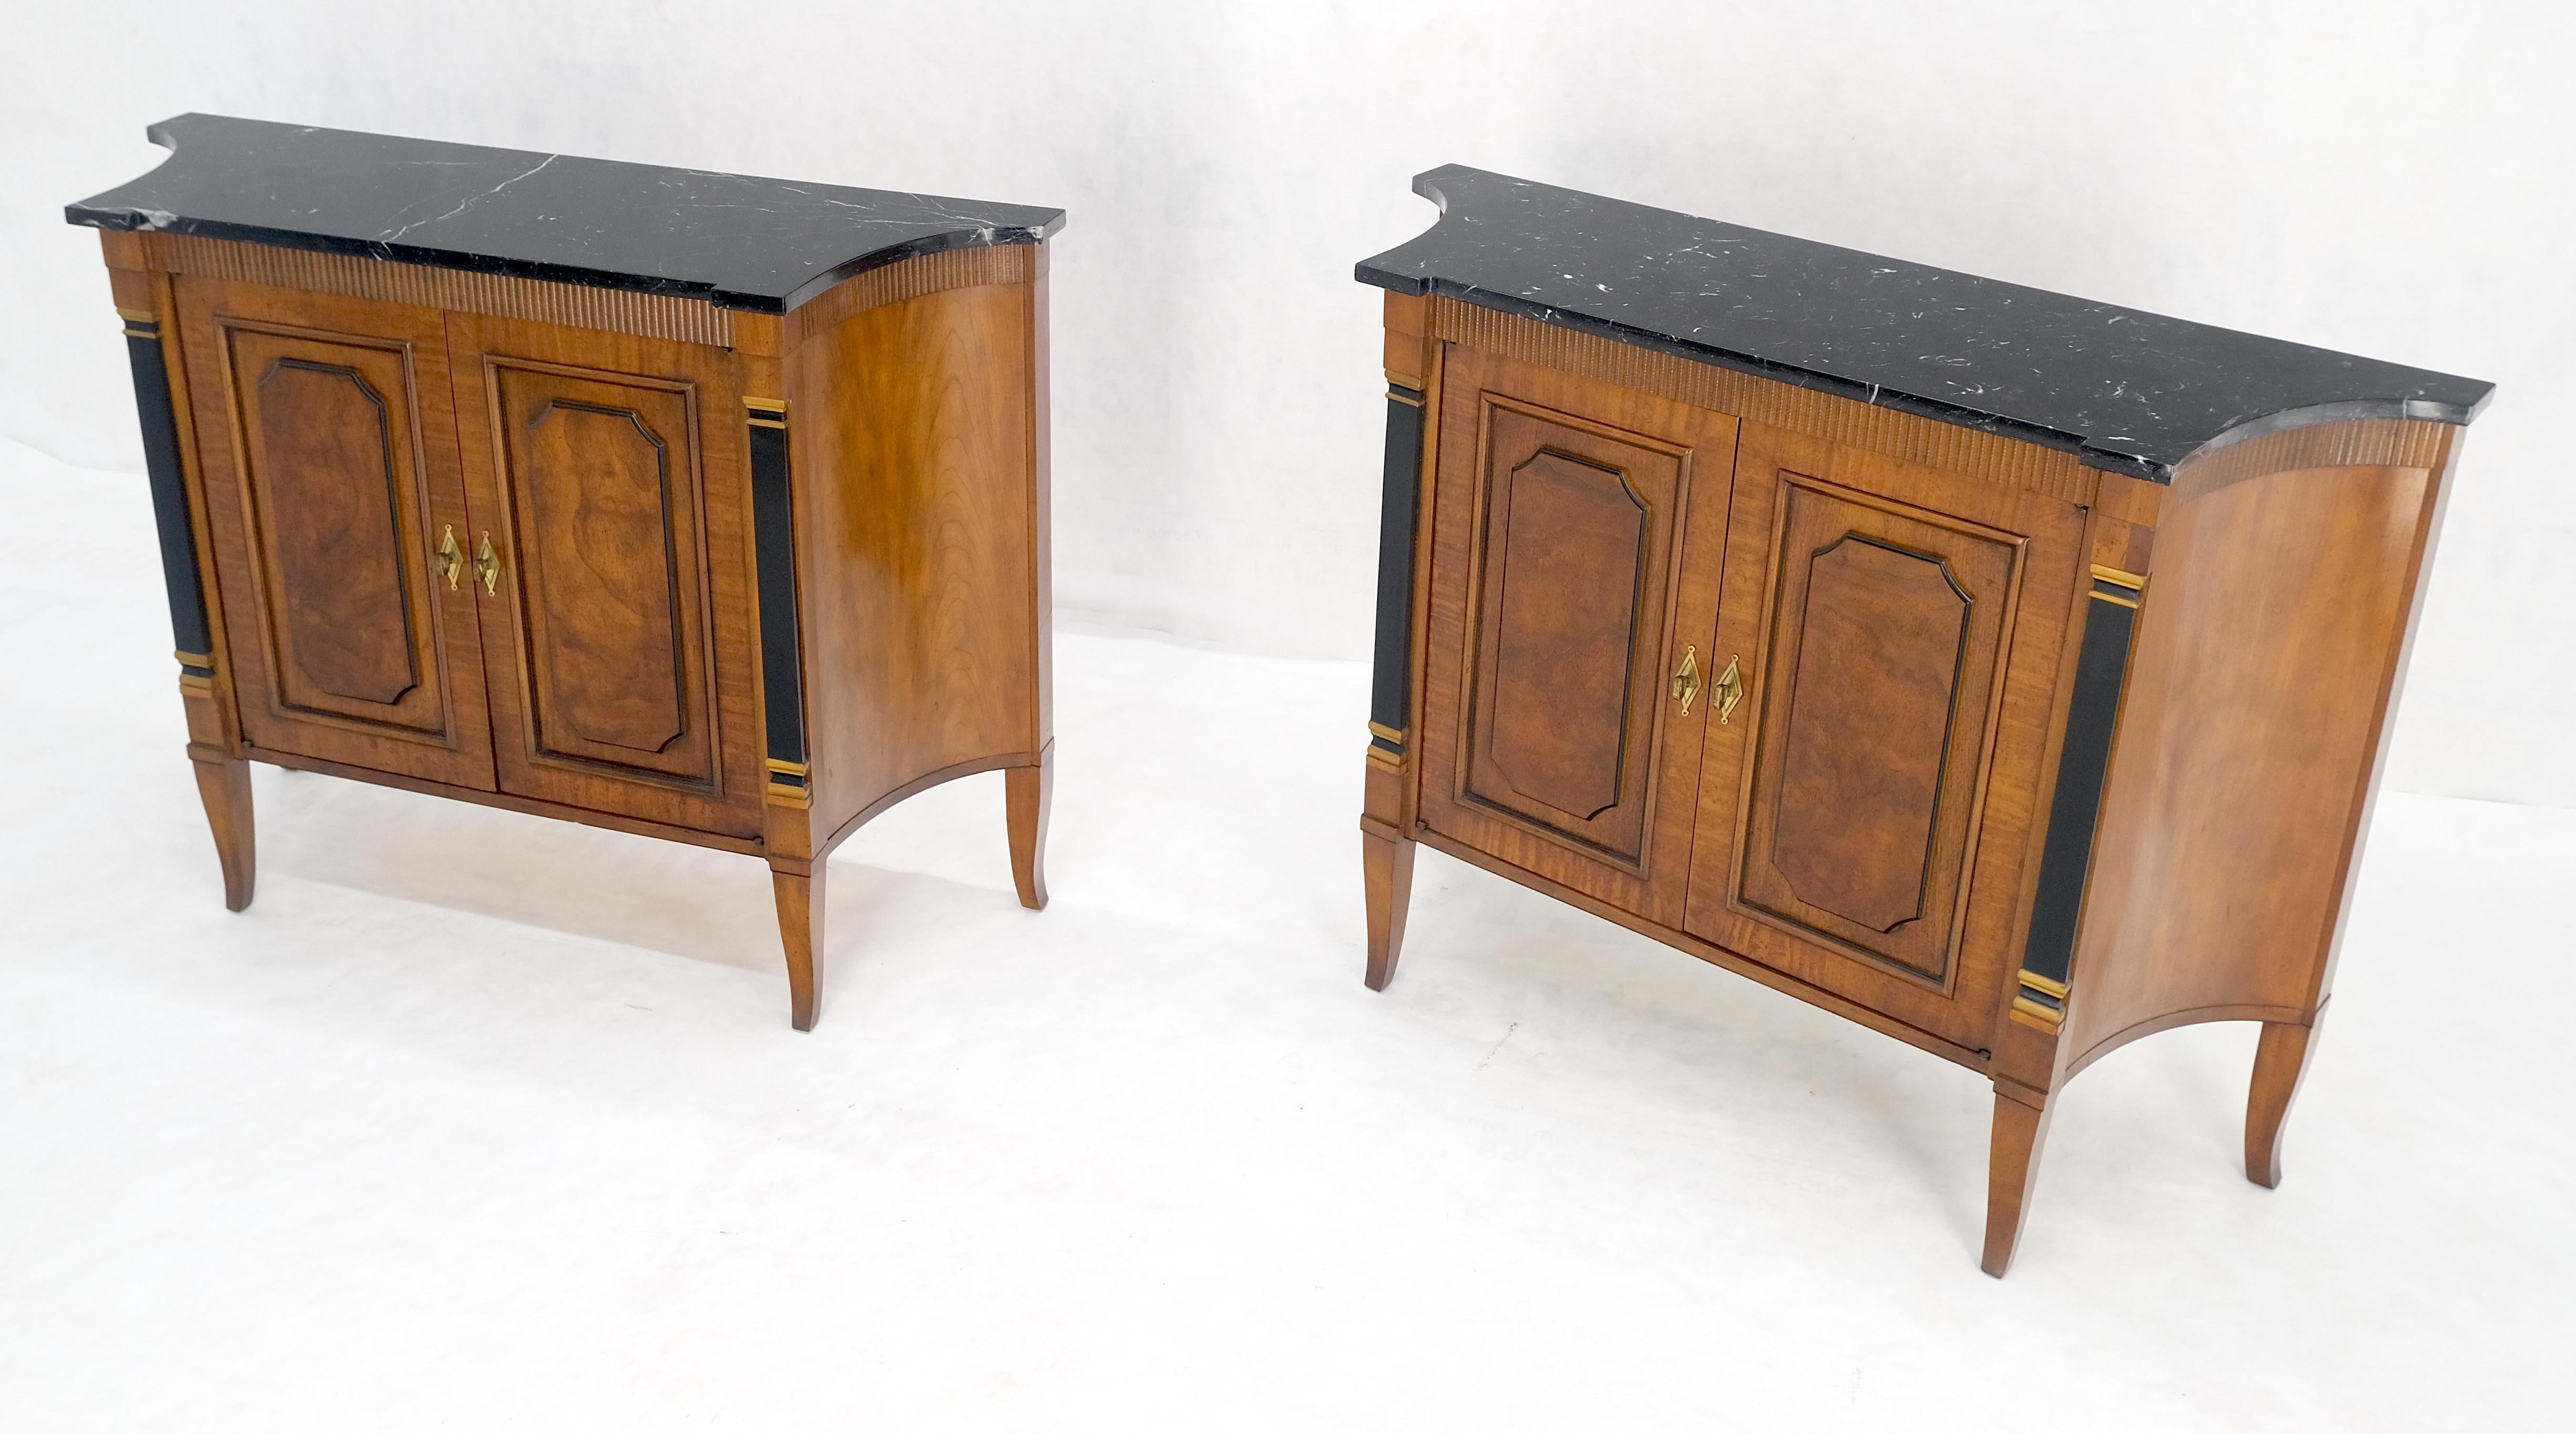 Brass Pair Regency Style Burl Walnut Scallop Banding Black Marble Top Cabinet Credenza For Sale